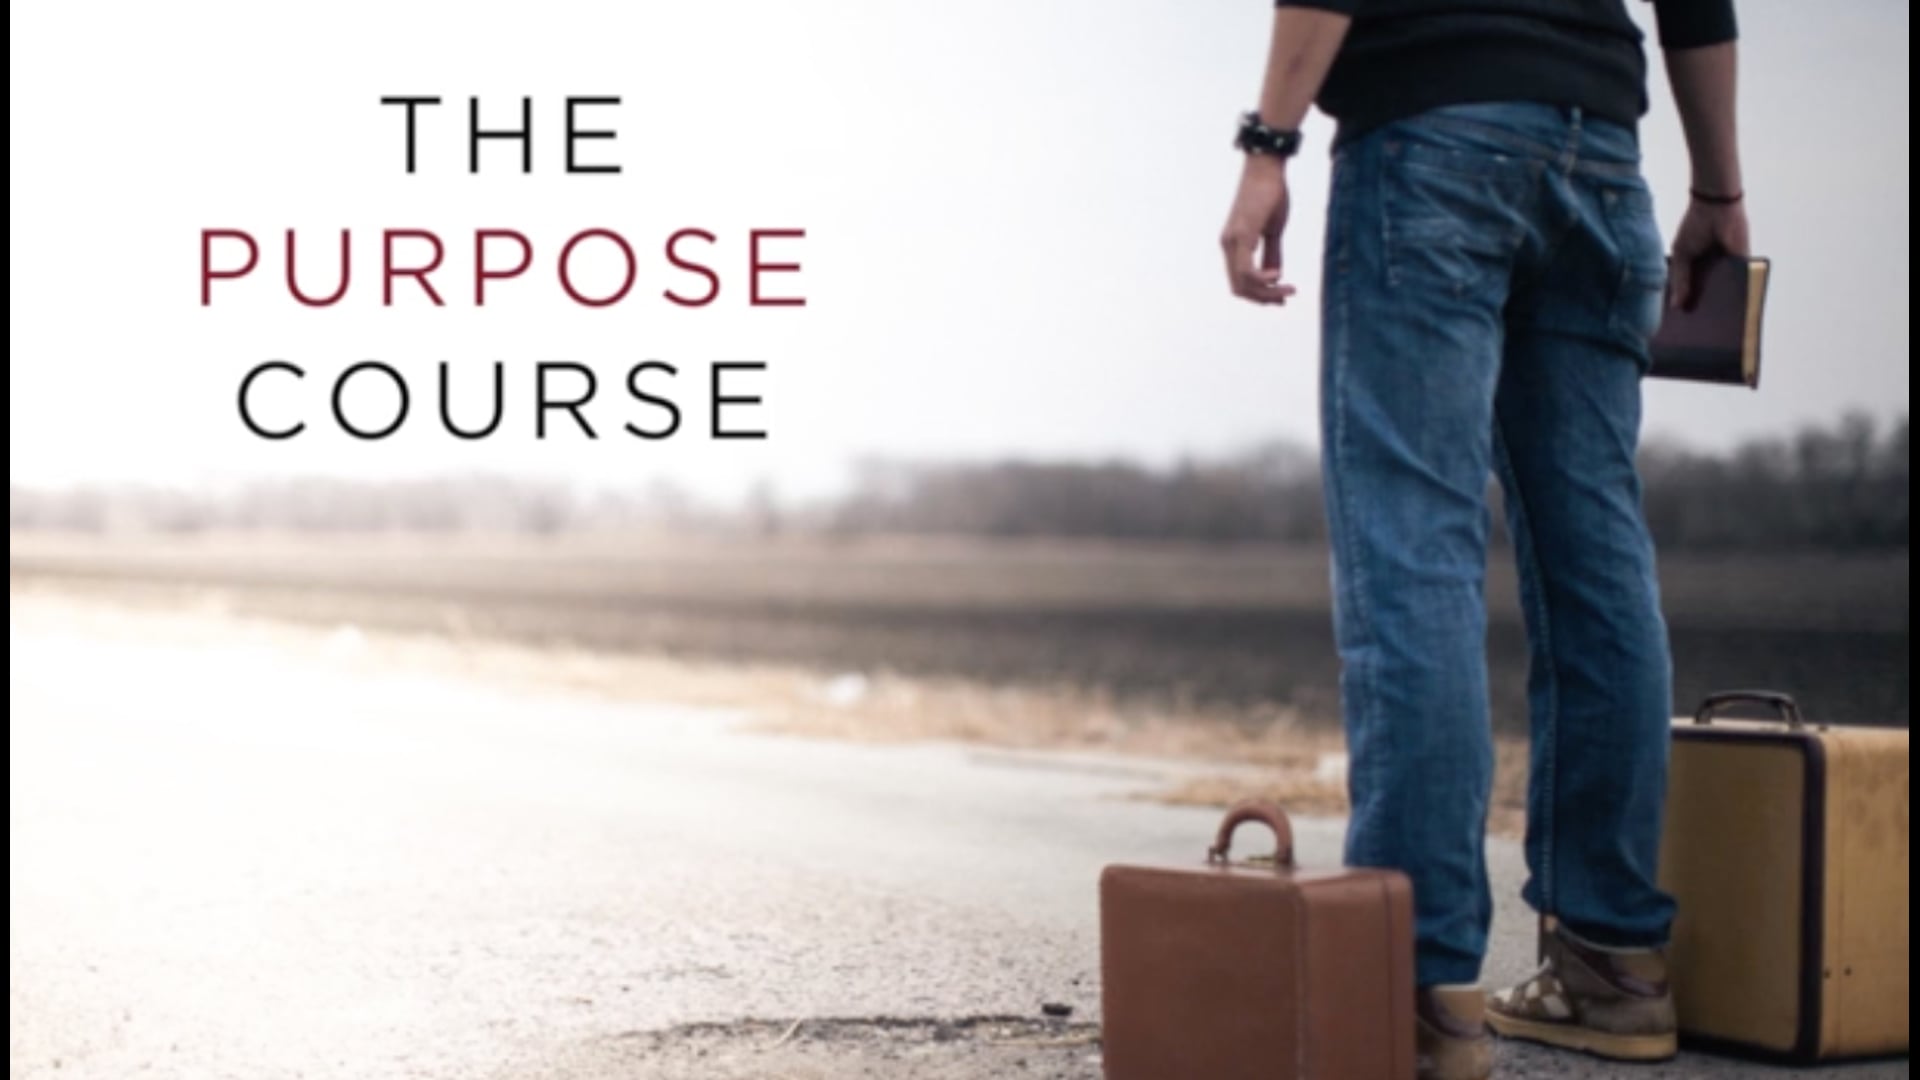 The Purpose Course 1 - MADE